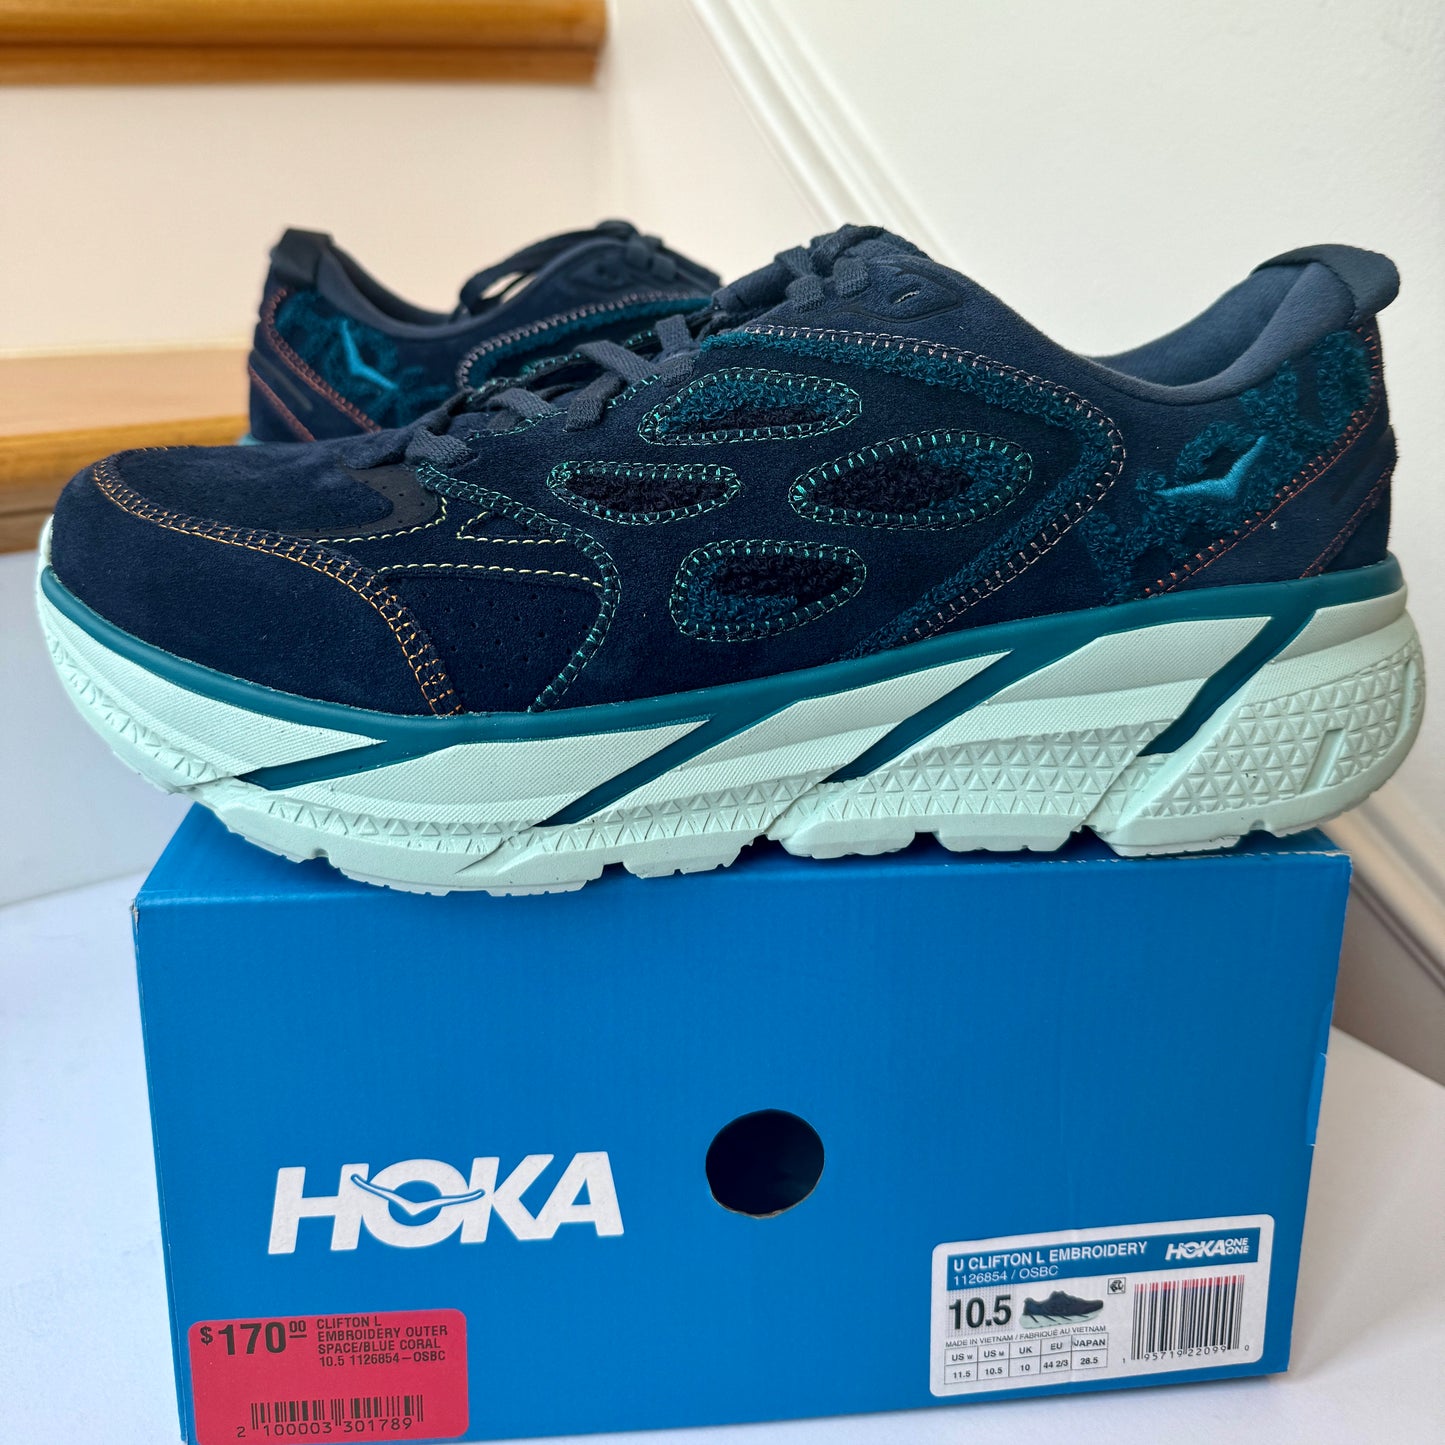 Hoka One One Clifton L Embroidery UNISEX Shoes Leather outer space blue